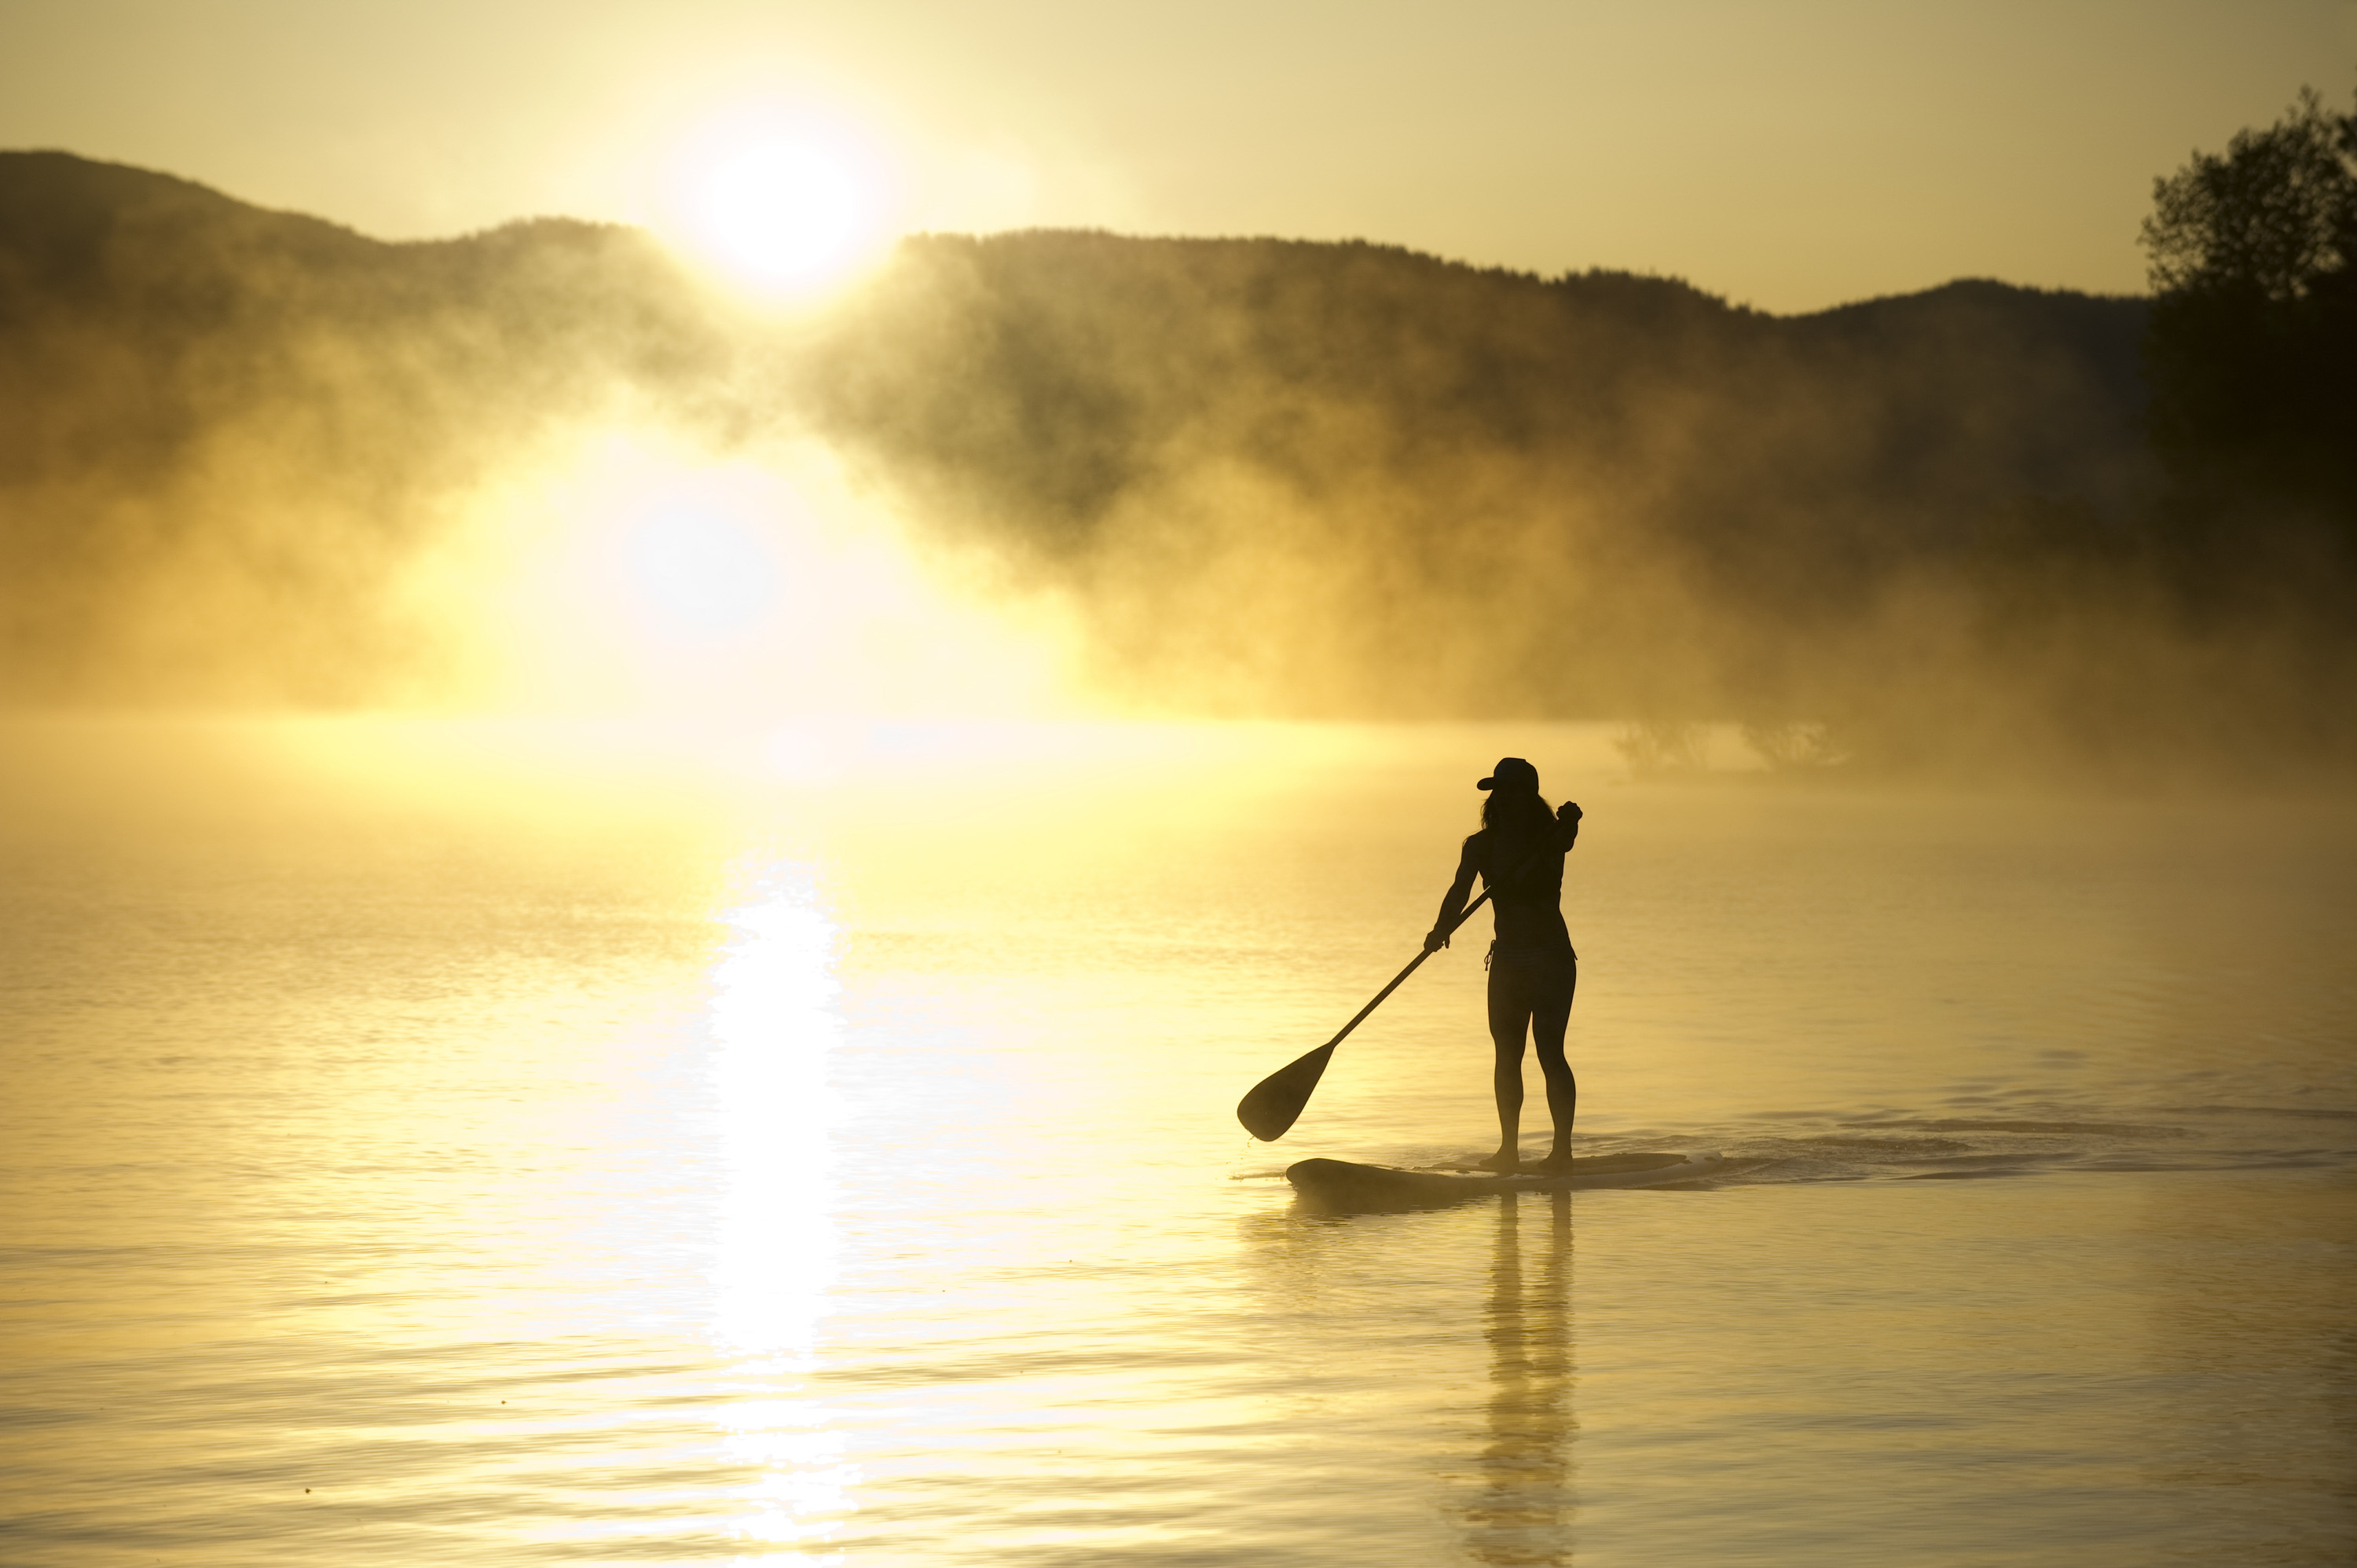 Stand up paddle boarding at sunrise in Lake Tahoe, CA.